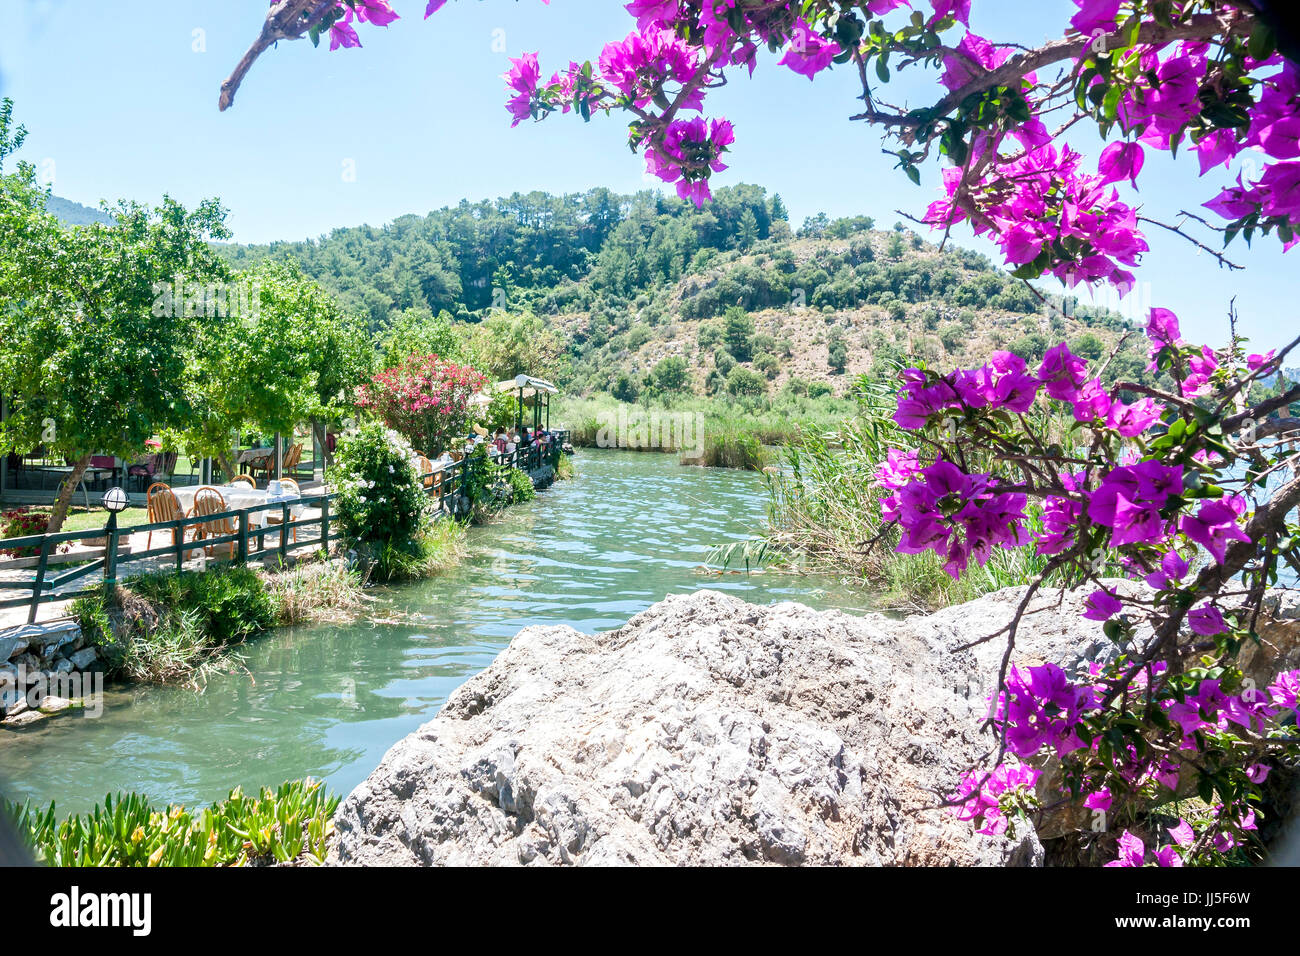 Restaurant by the Çayı River that leads to the town of Dalyan, Turkey Stock Photo